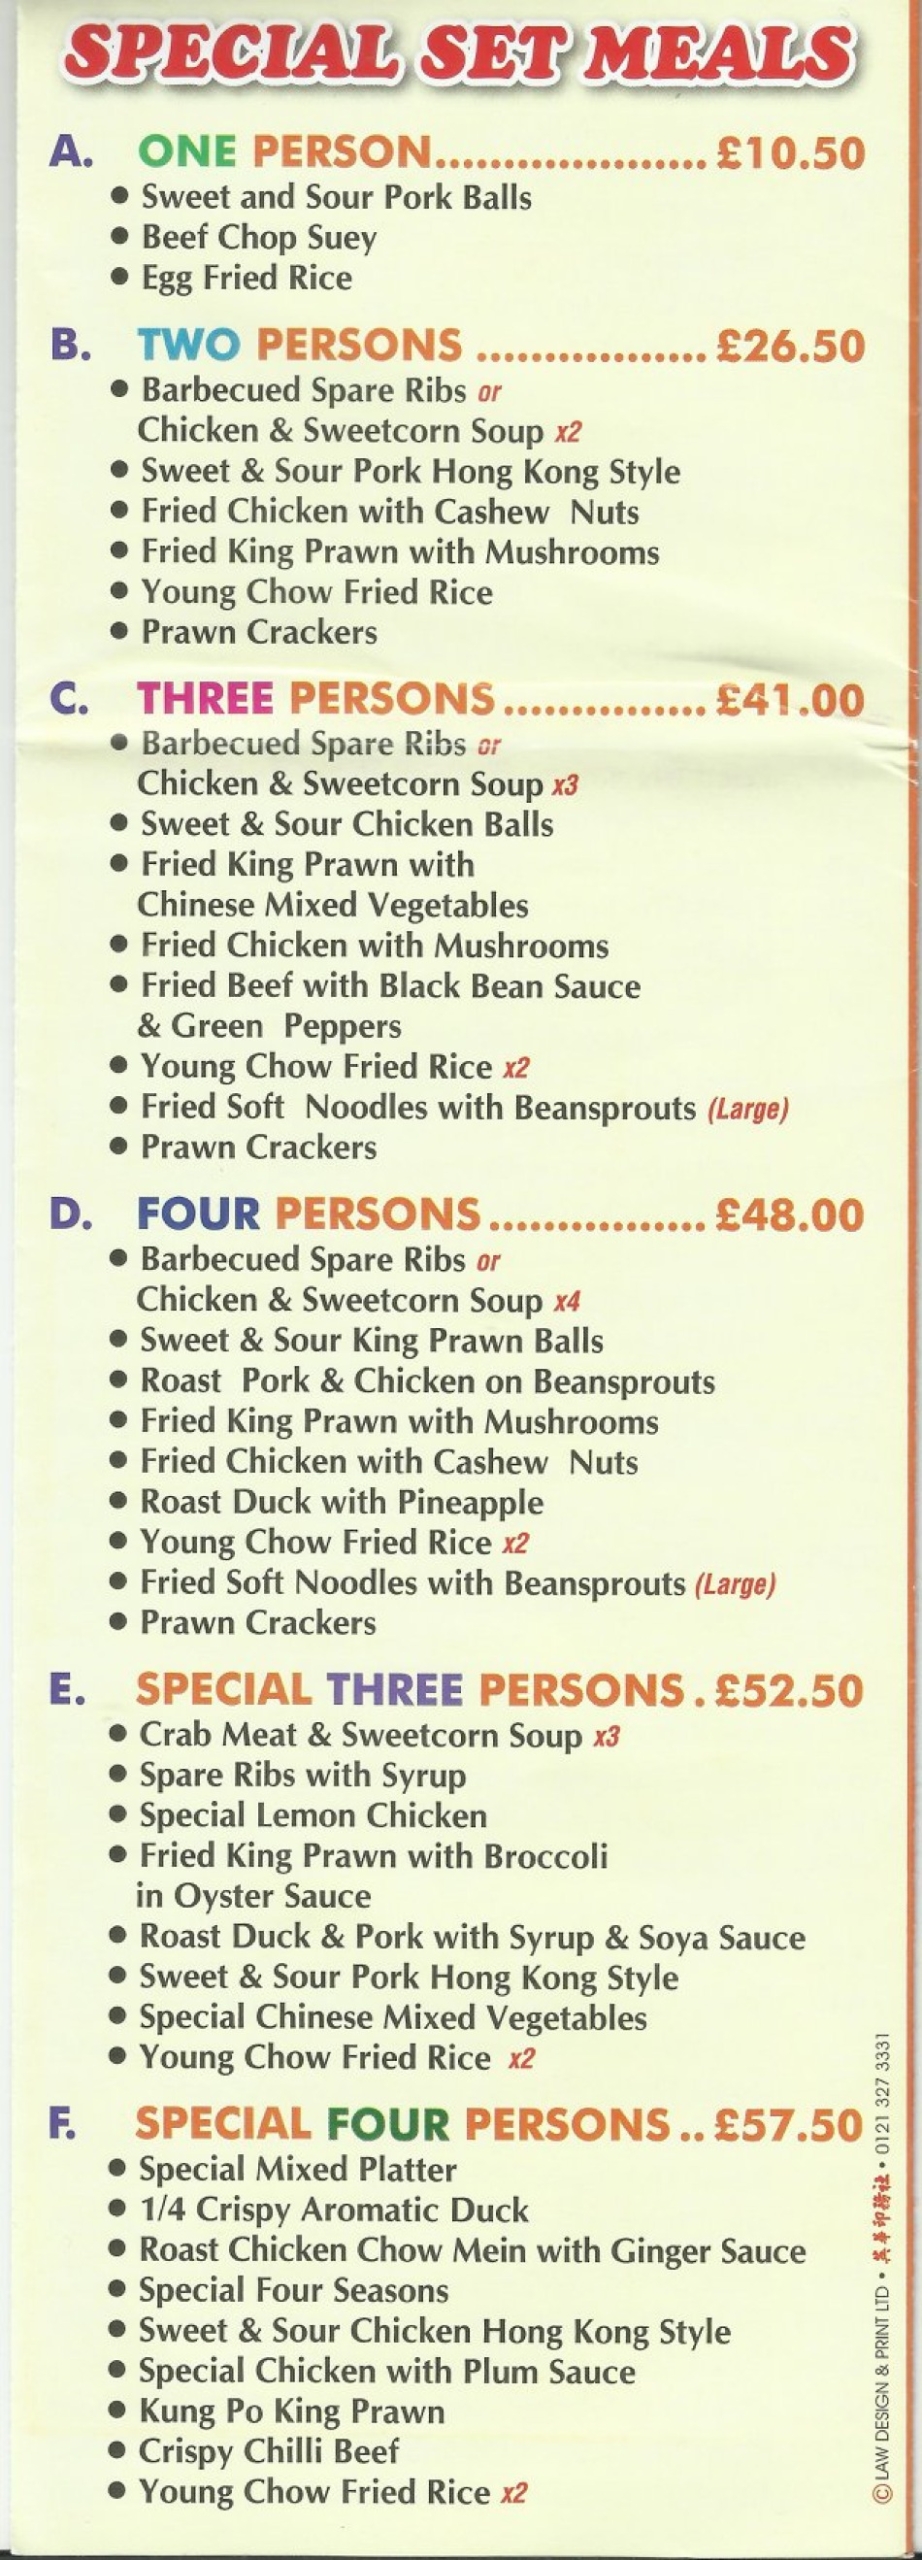 Takeaway Restaurant Menu Page - Seven Up Express Chinese Takeaway - Plymouth